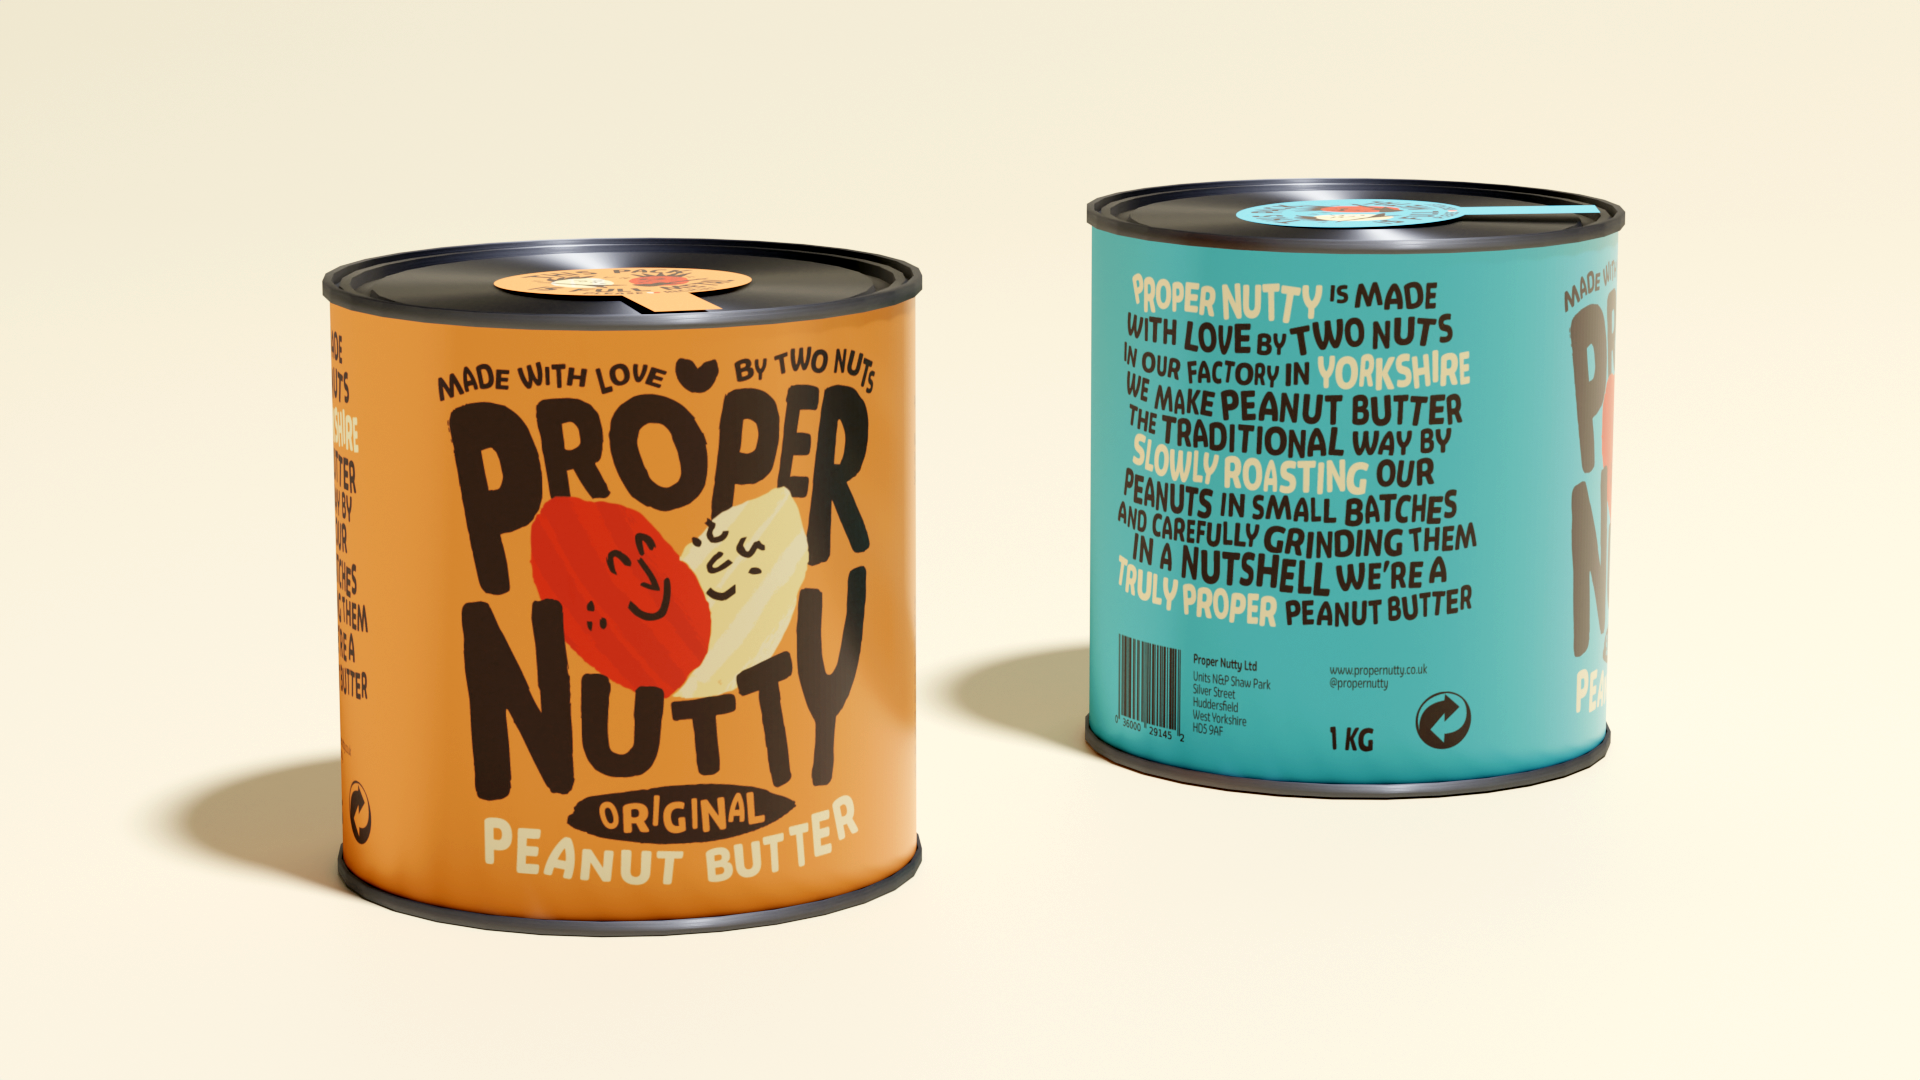 Packaging concept for Proper Nutty Peanut Butter by Eoin O'Kramer mocked up onto tins, illustrations of peanuts and text.